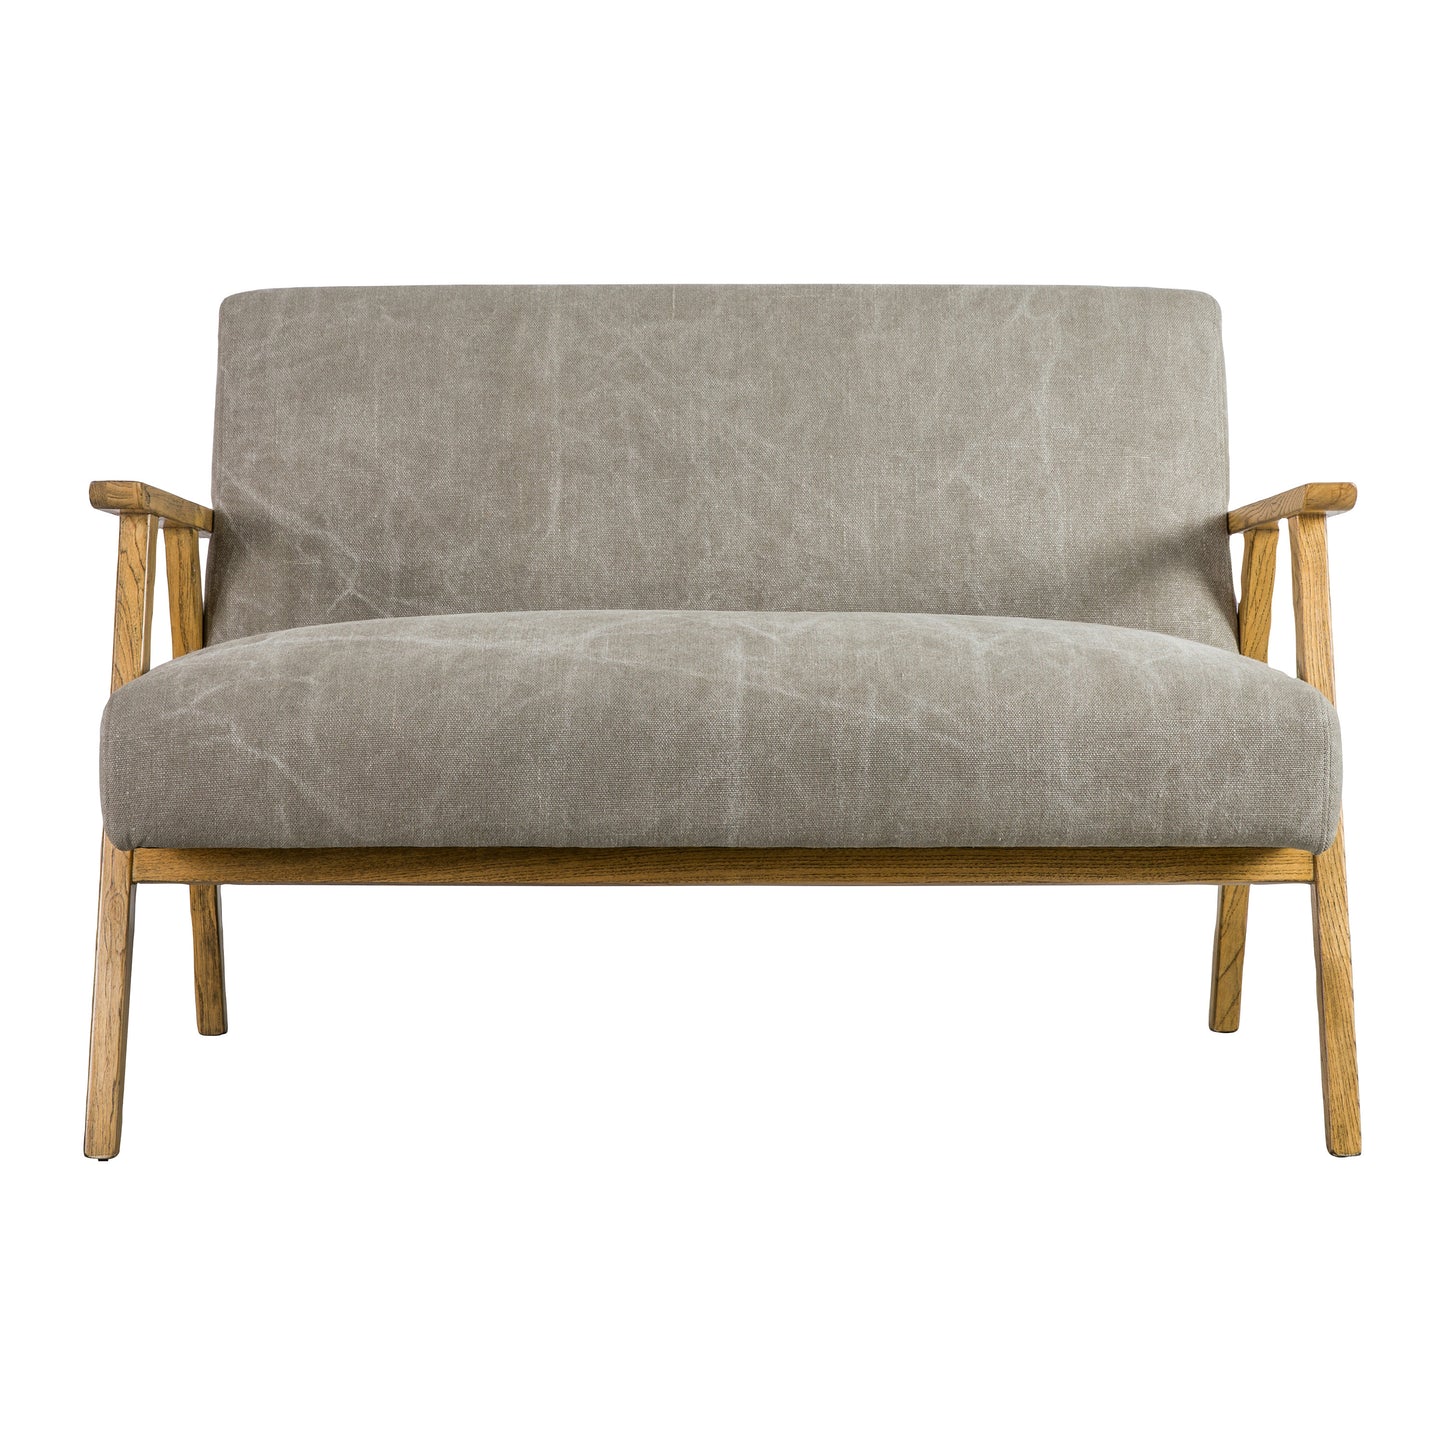 A stylish home furniture piece: the Neyland 2 Seater Sofa (Pebble Linen) with a wooden frame and a grey upholstered seat offered by Kikiathome.co.uk.